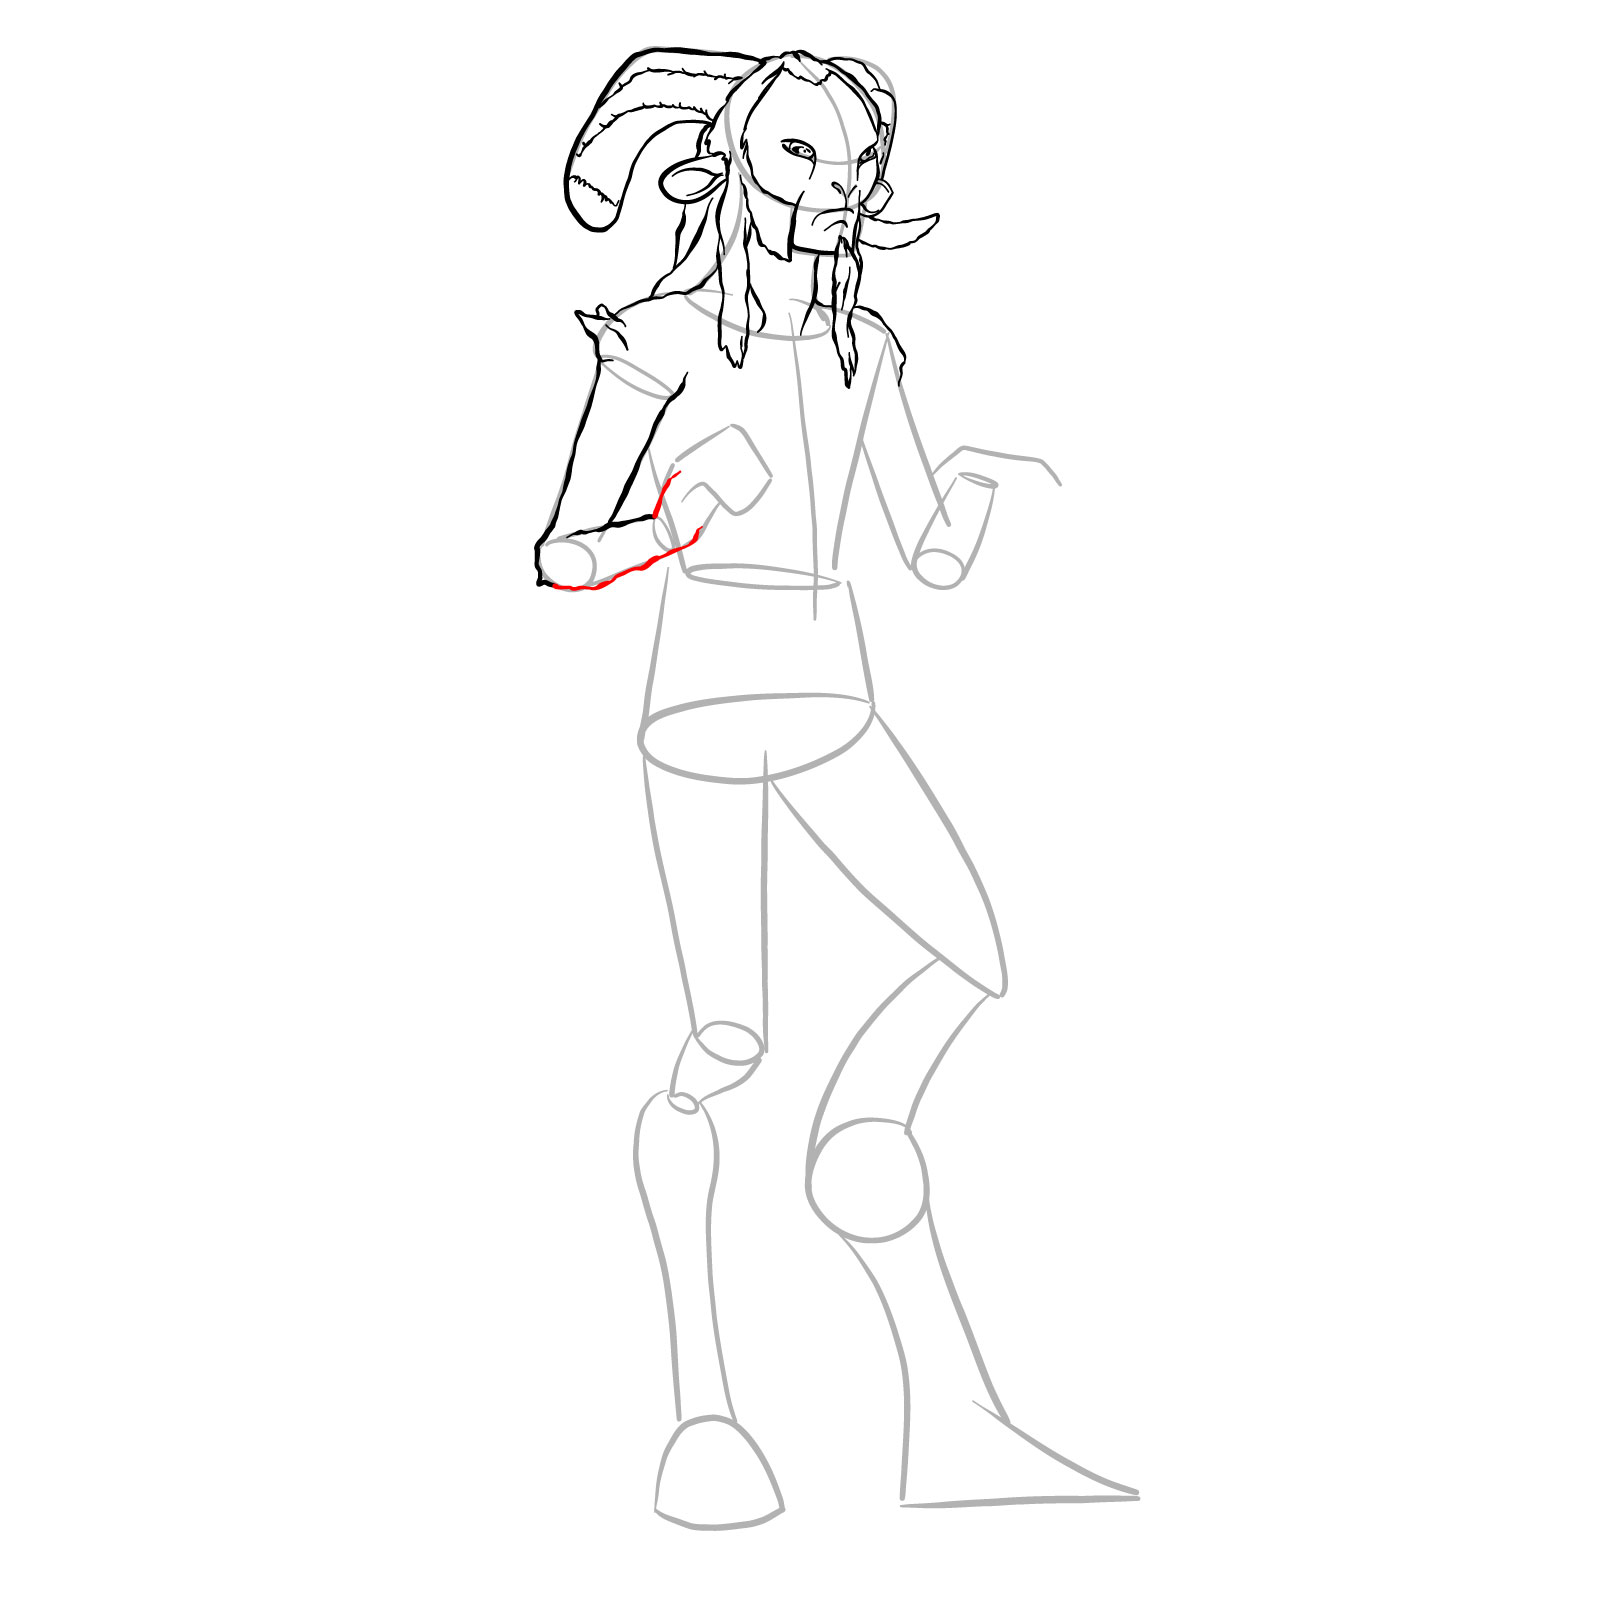 How to draw a Faun - step 17